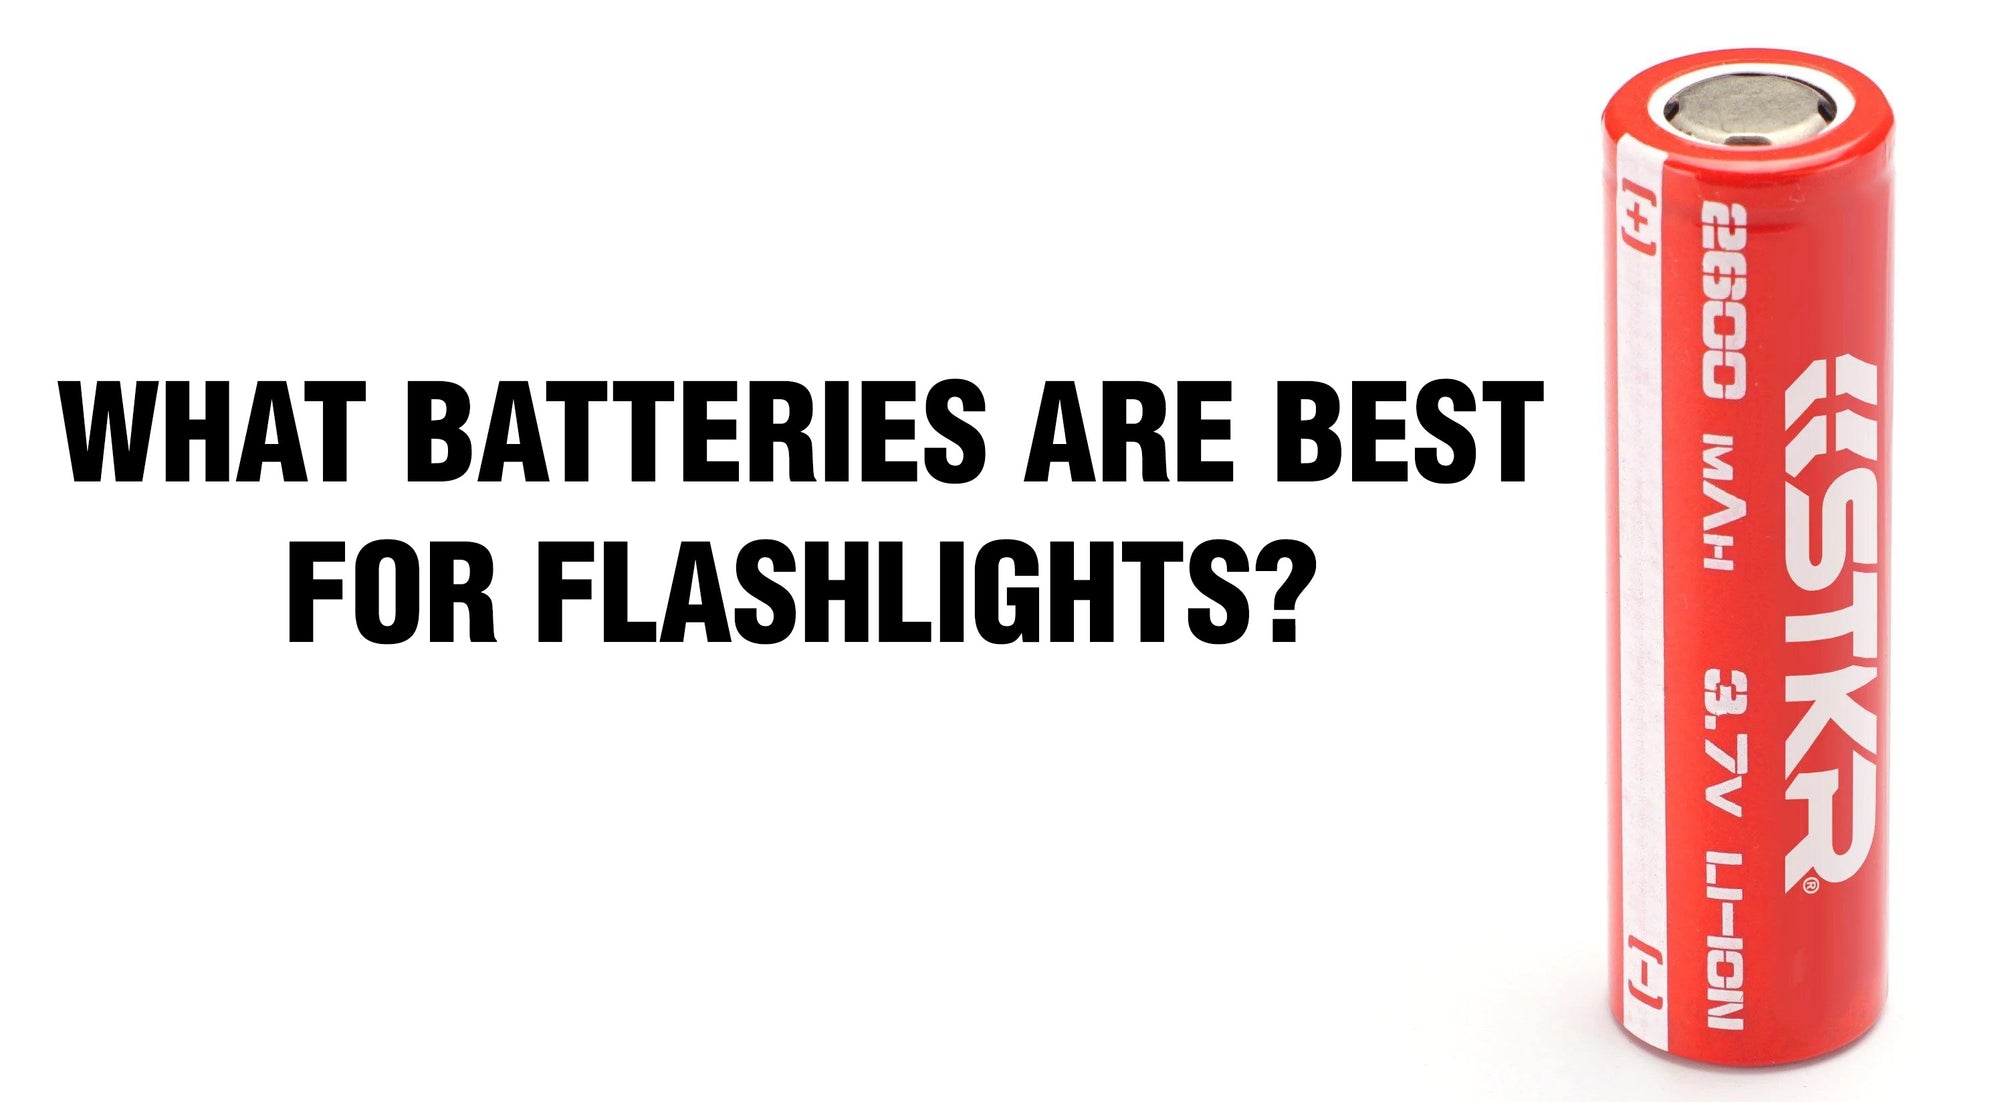 The Best AA Batteries for Flashlights, Toys, and More